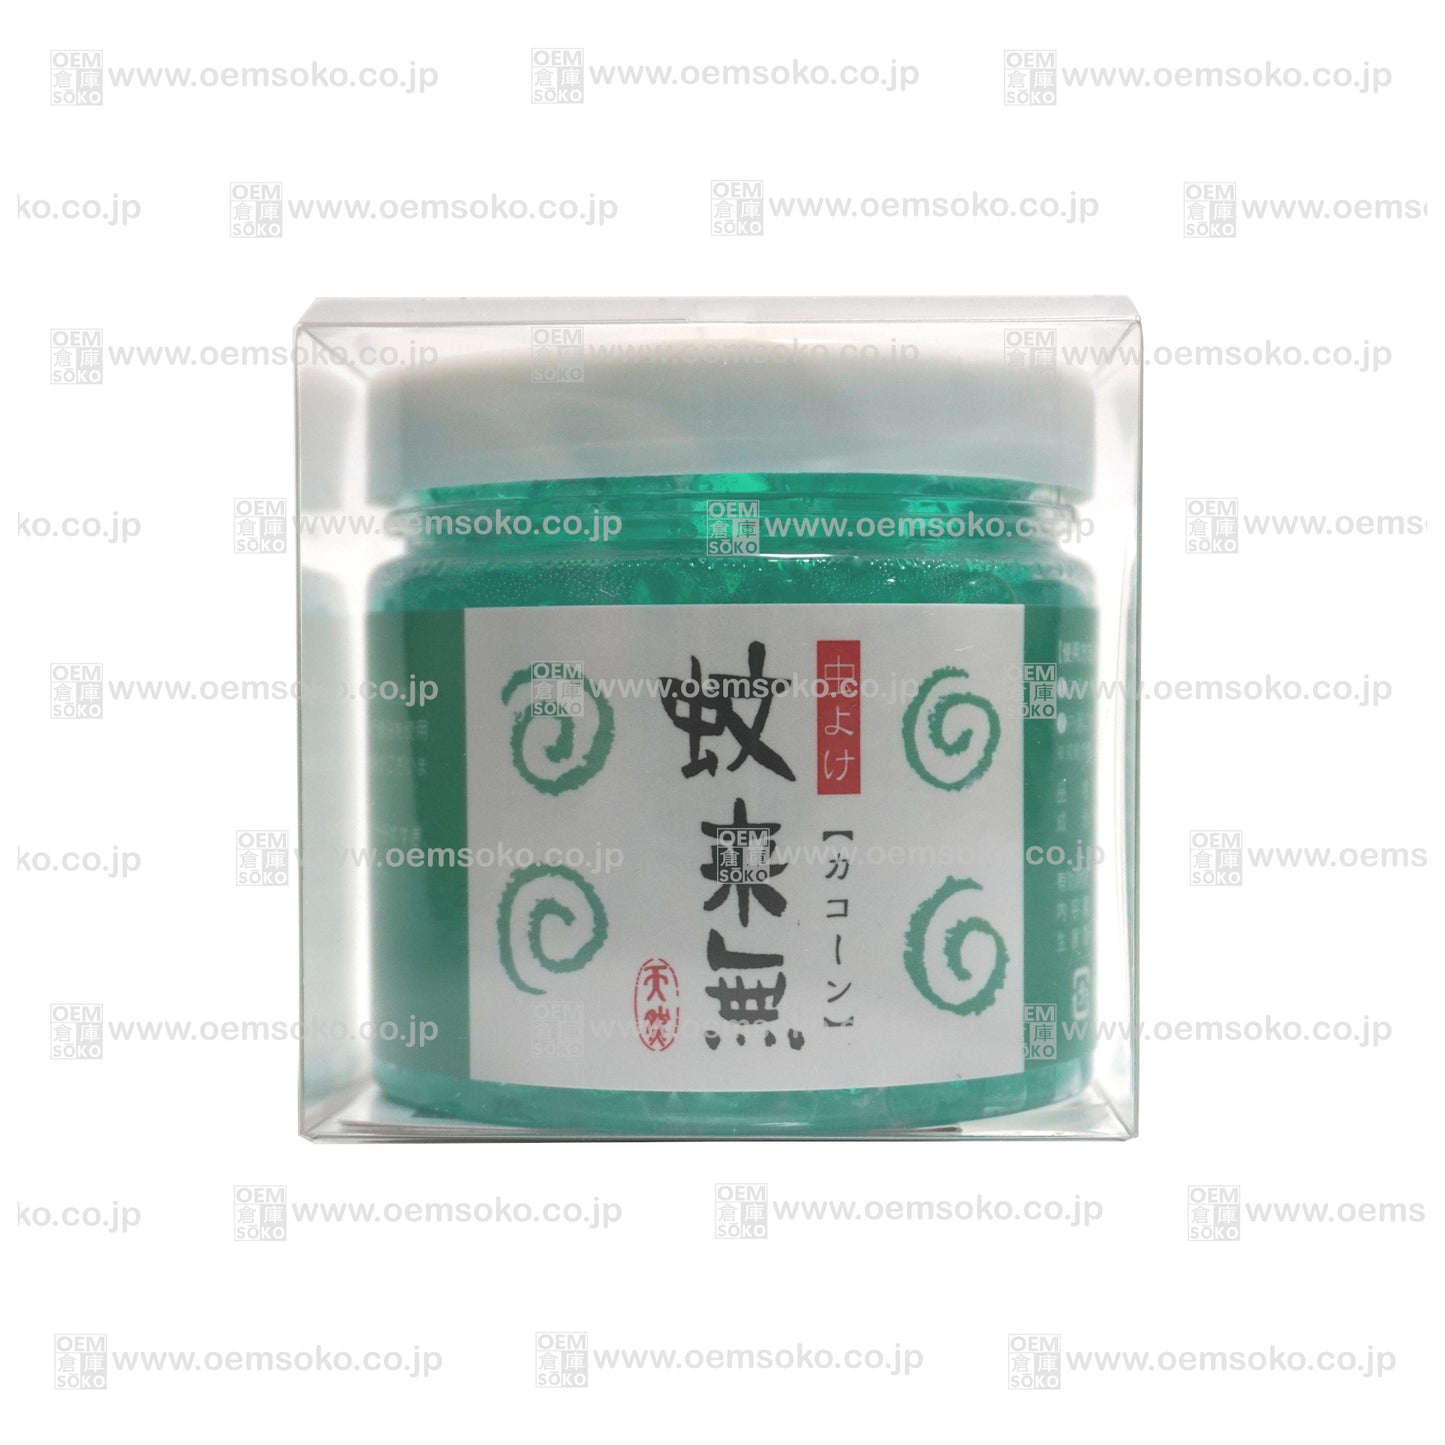 "Kako-n" Insect repellant with Eucalyptus by Life Taste Co., Ltd.